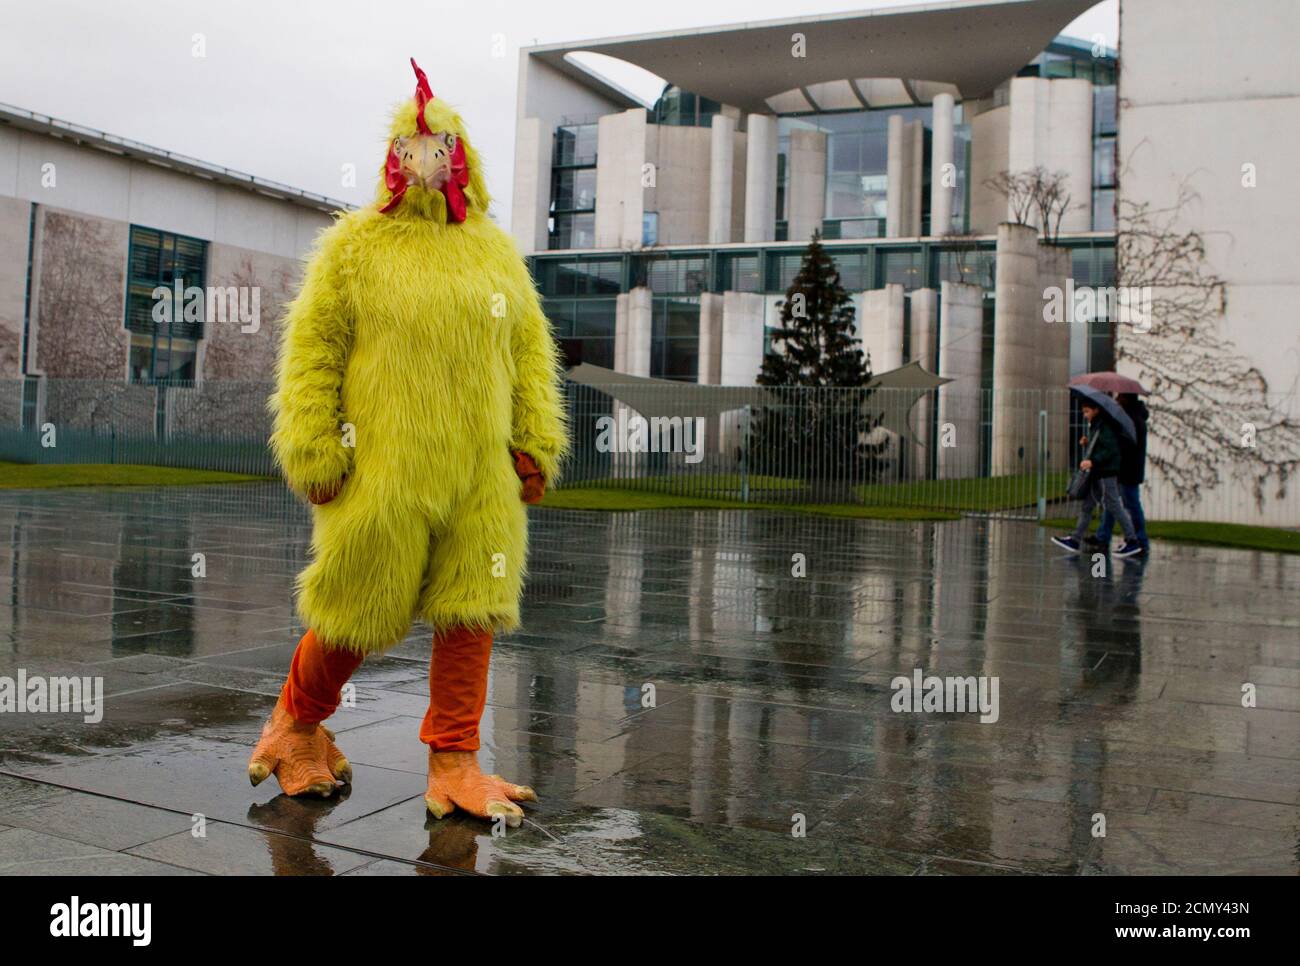 An animal rights activist wears a chicken costume during a protest against kosher and halal practices of butchering animals in front o the Chancellery in Berlin, January 5, 2012. REUTERS/Thomas Peter (GERMANY - Tags: CIVIL UNREST ANIMALS) Stock Photo